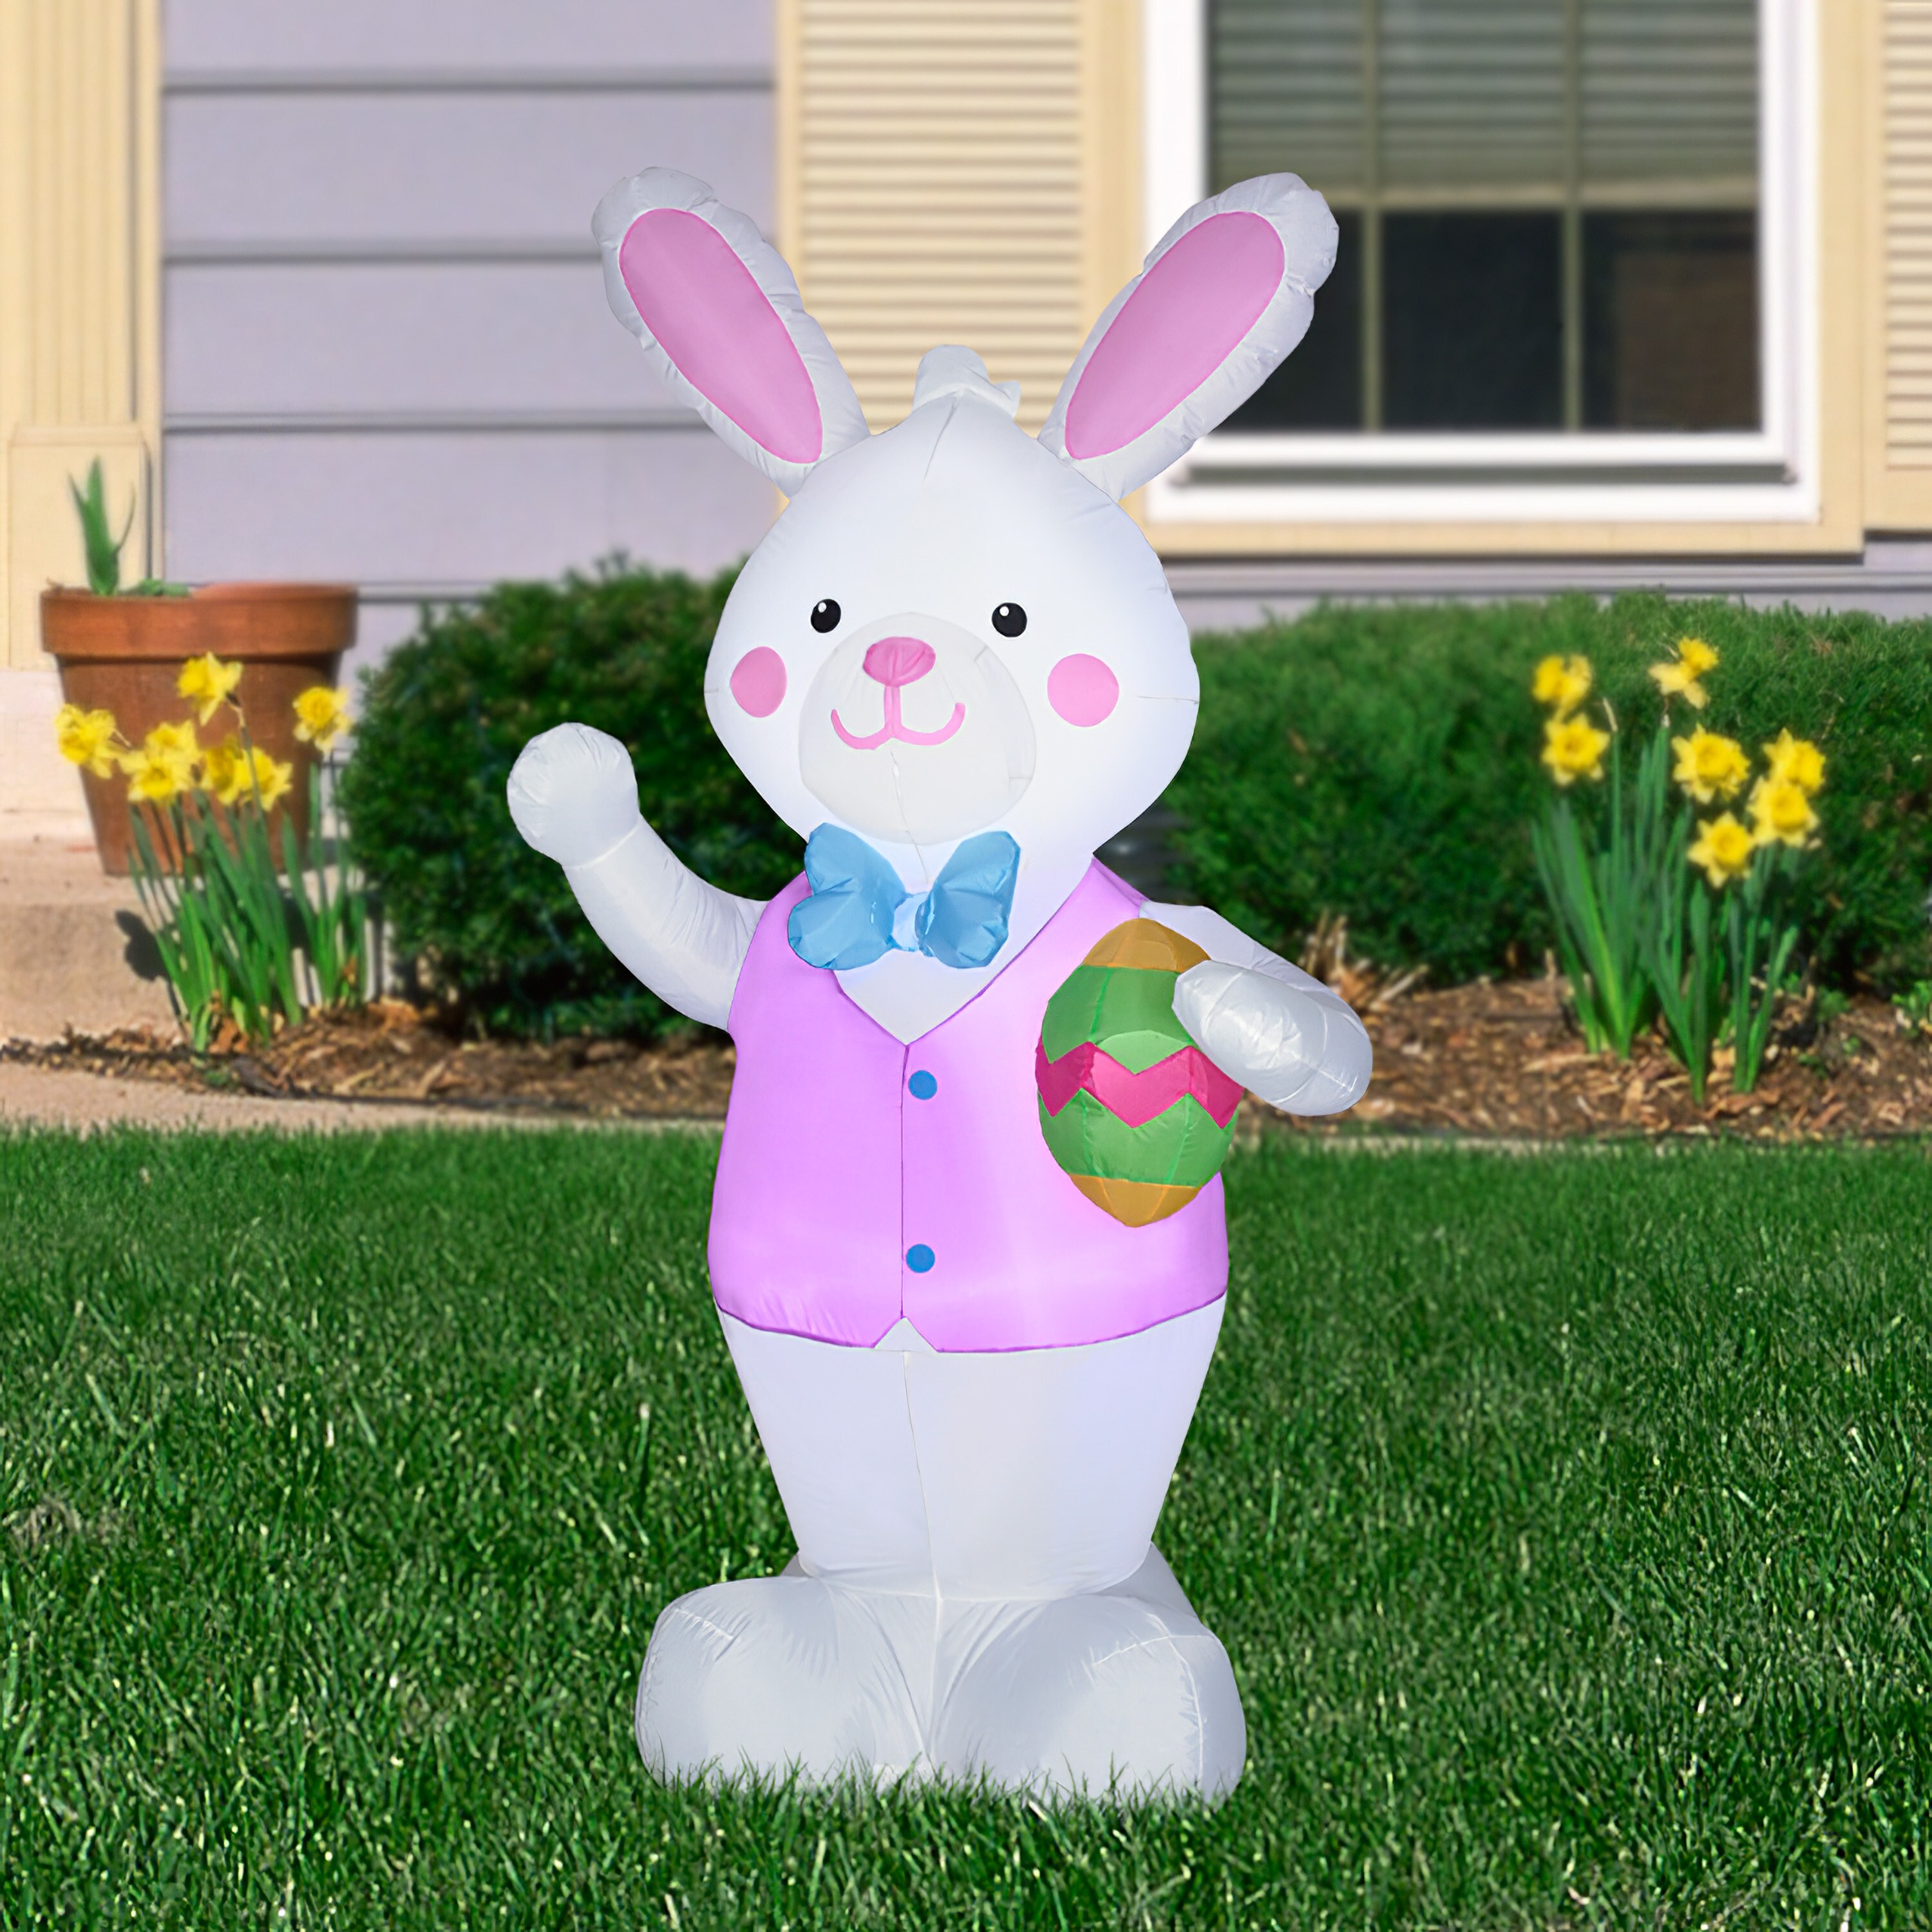 EASTER BUNNY BANNER 4 FT  AIRBLOWN INFLATABLE YARD DECORATION 